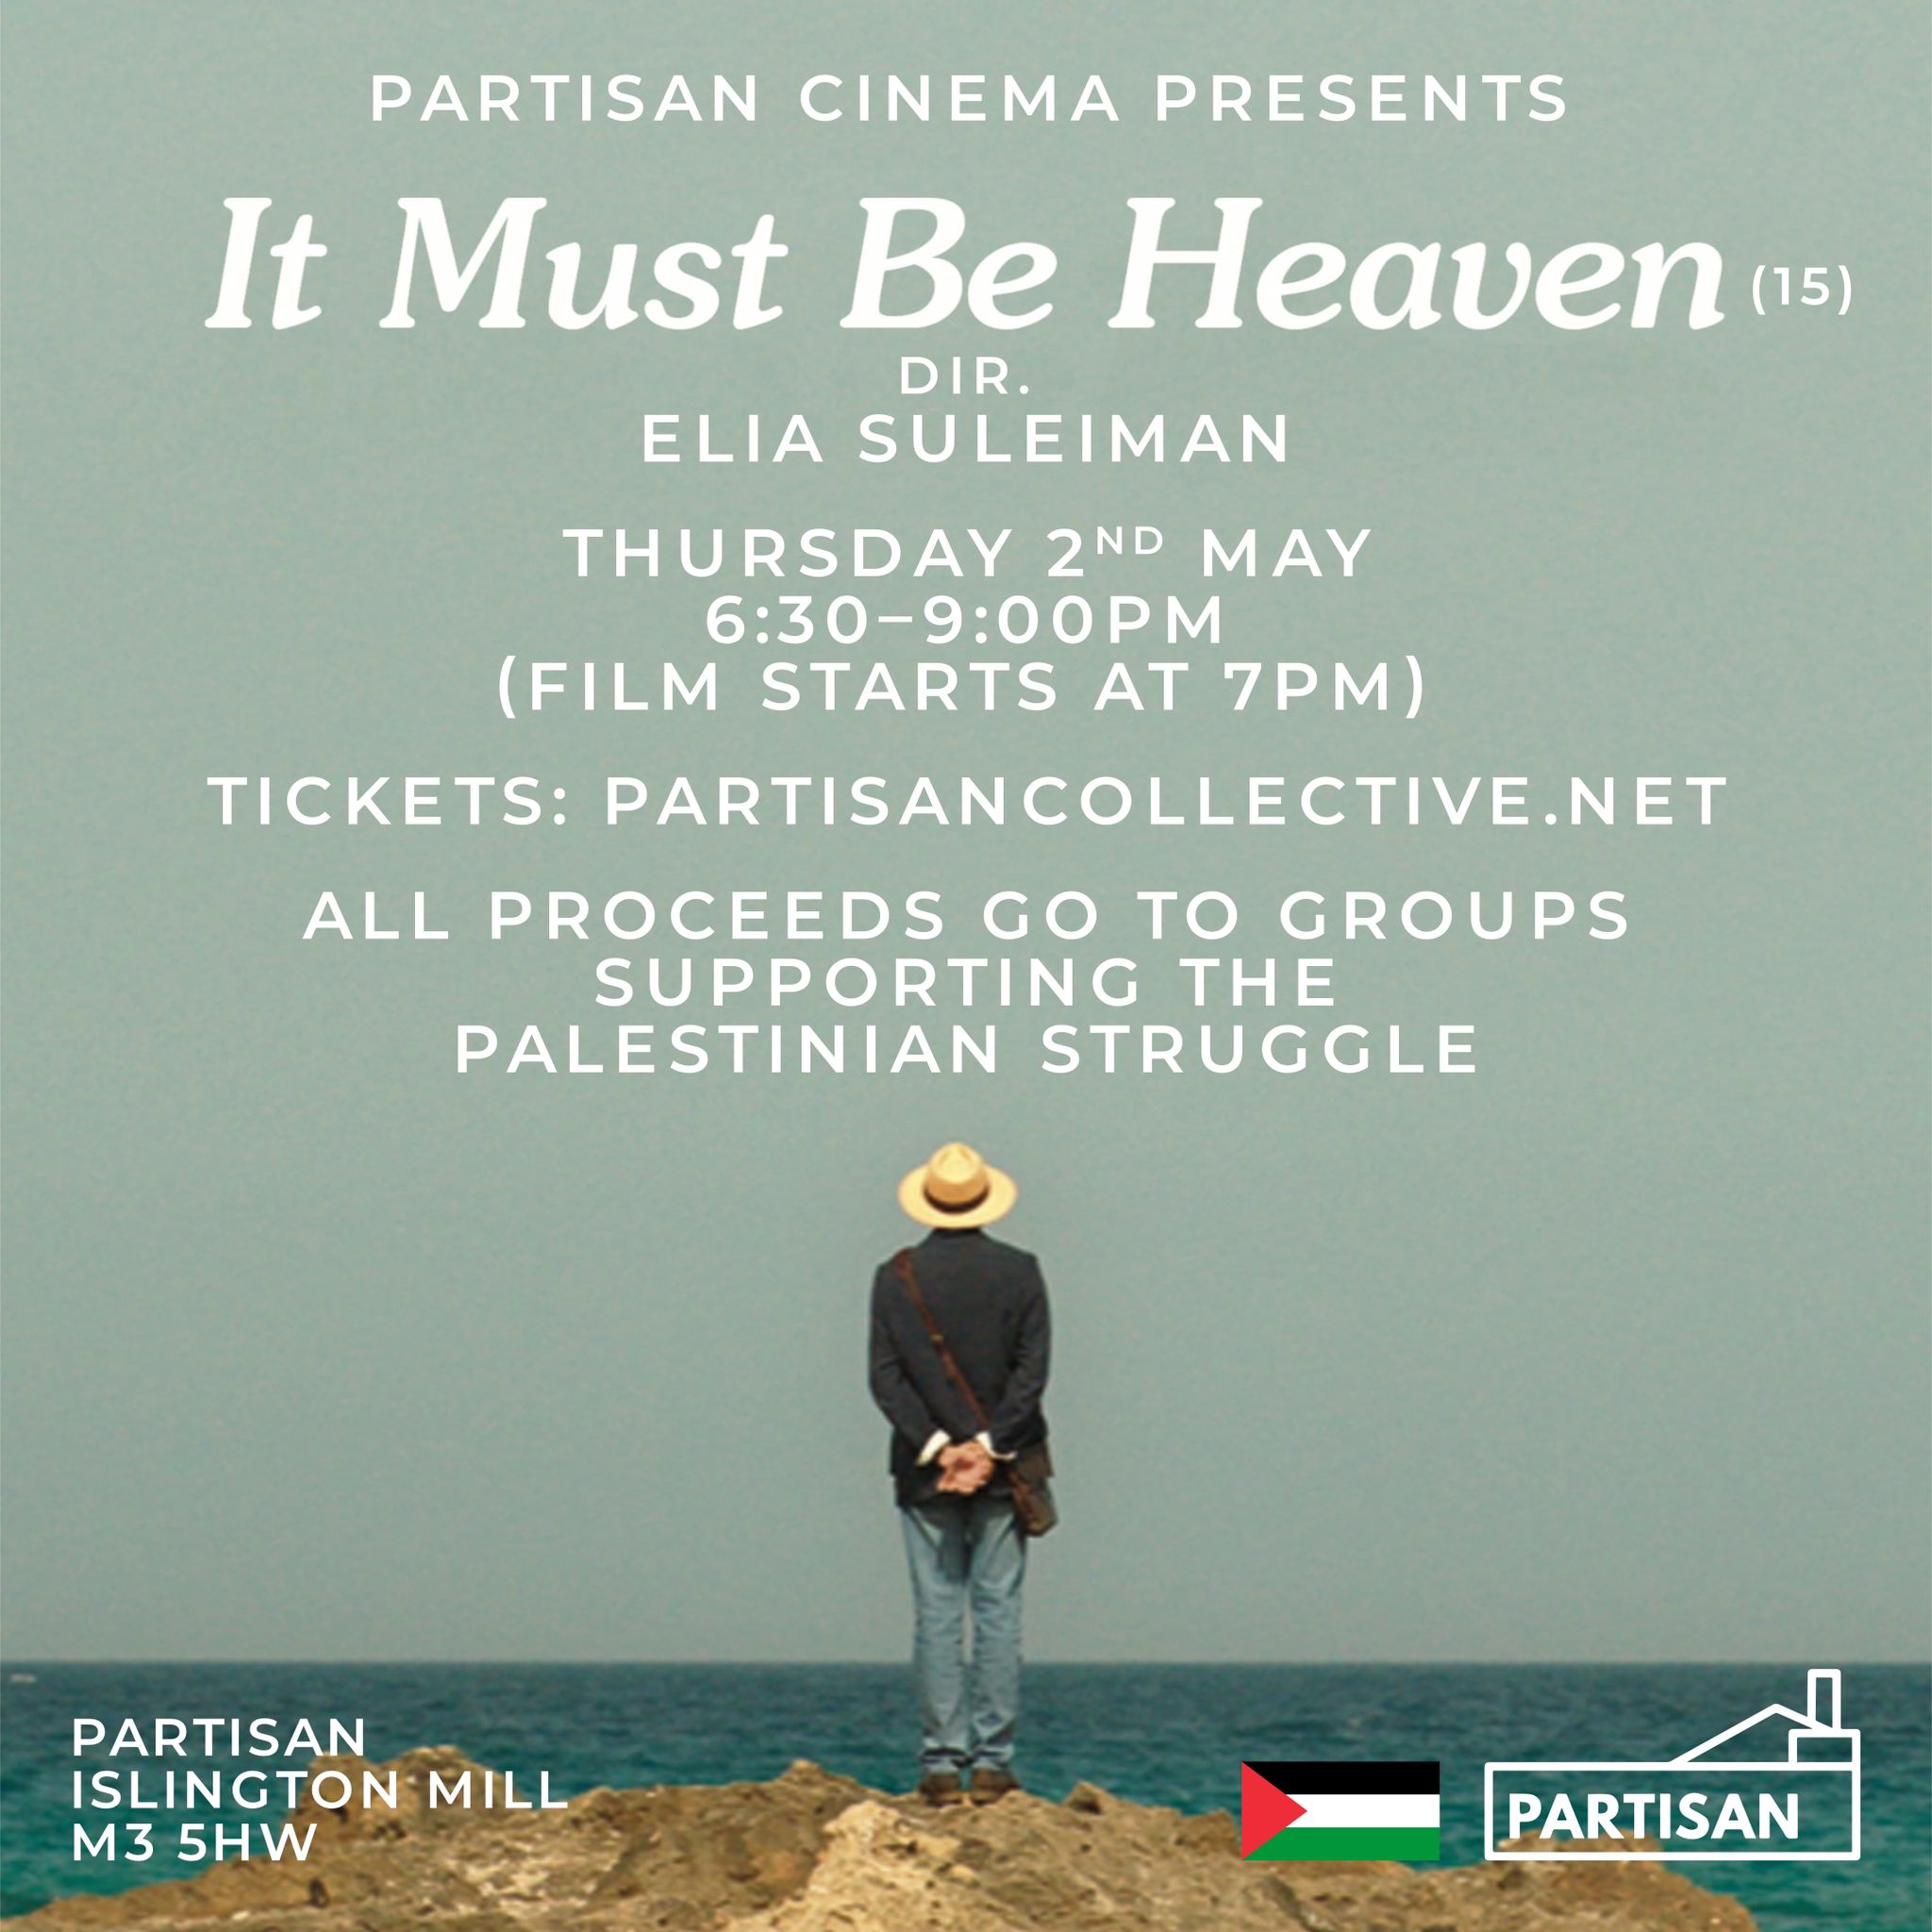 Partisan Cinema presents It Must Be Heaven (15) Dir. Elia Suleiman Thursday 2nd May 6:30 - 9:00pm (Film starts at 7pm) All proceeds go to groups supporting the Palestinian struggle Partisan Islington Mill M3 5HW